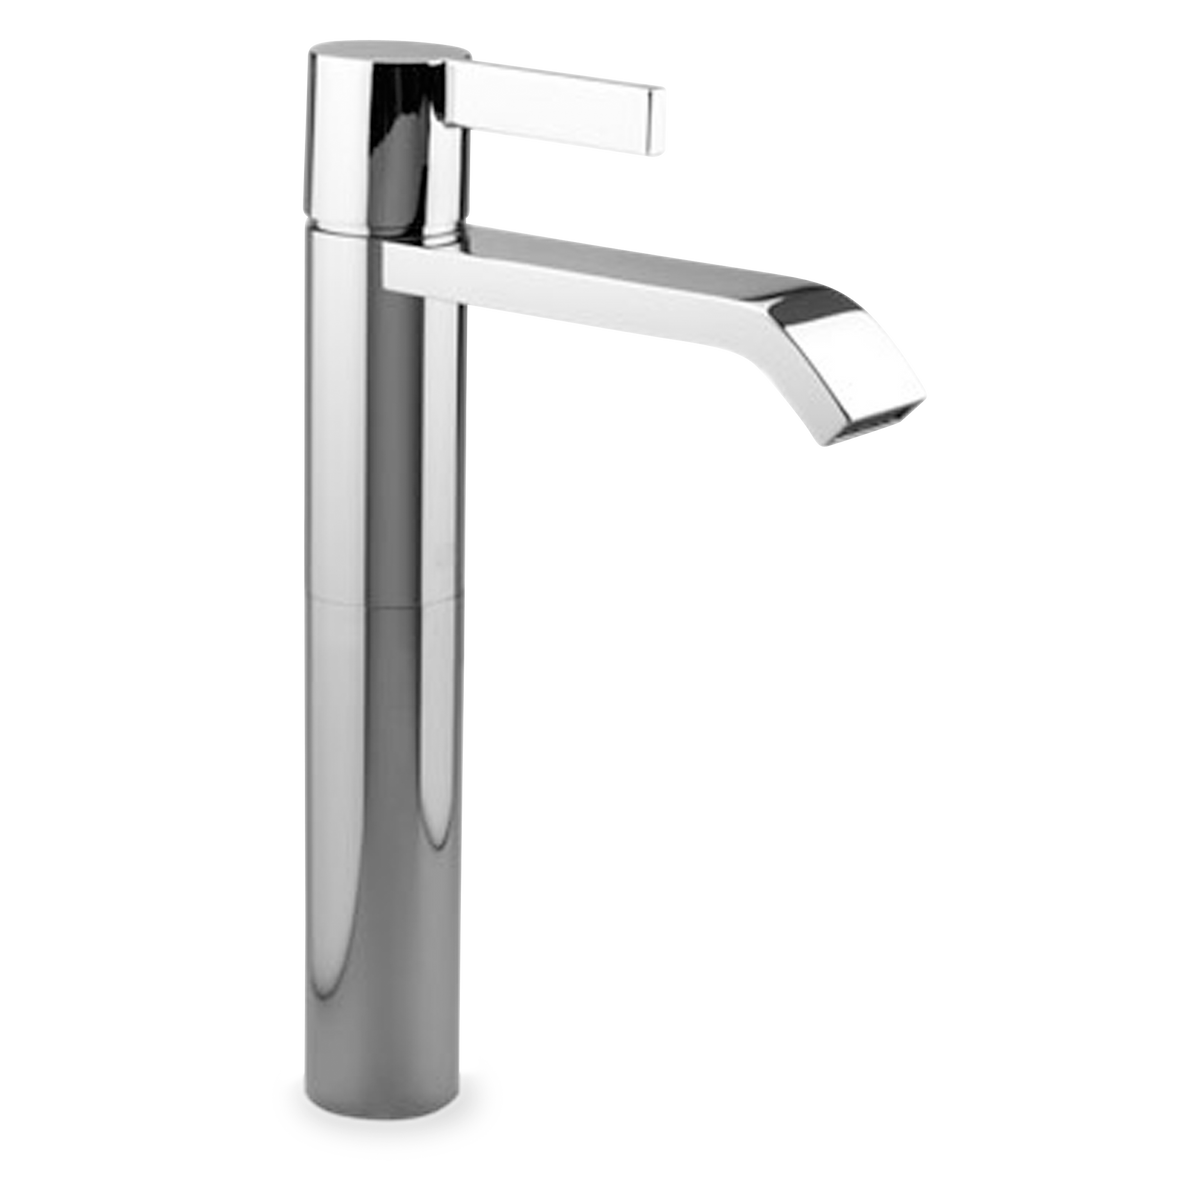 Imo Vessel Faucet